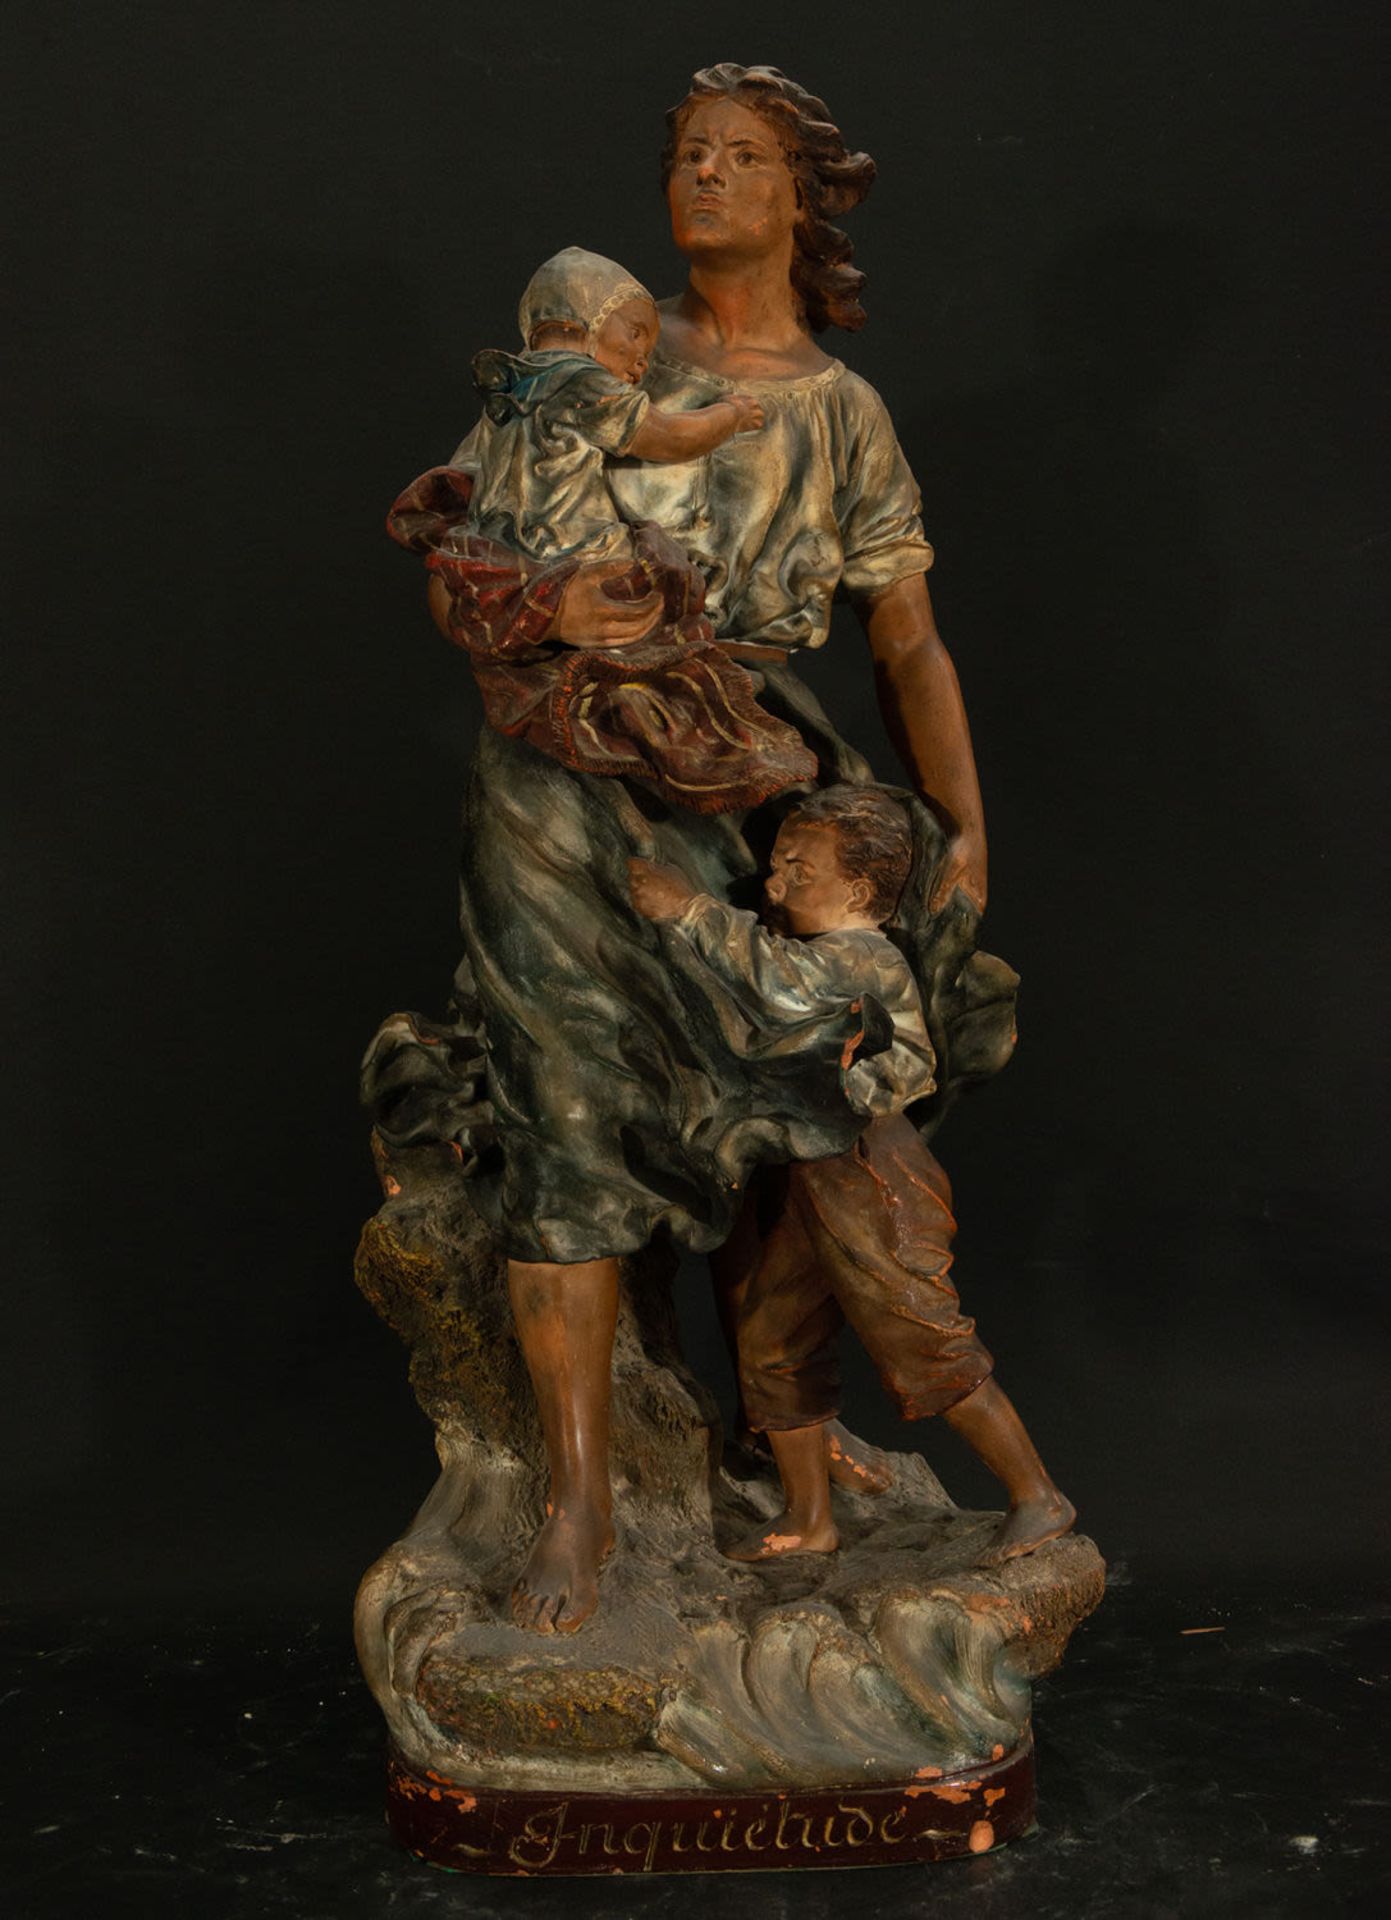 Mother with Child, polychrome terracotta, 19th century Italian school